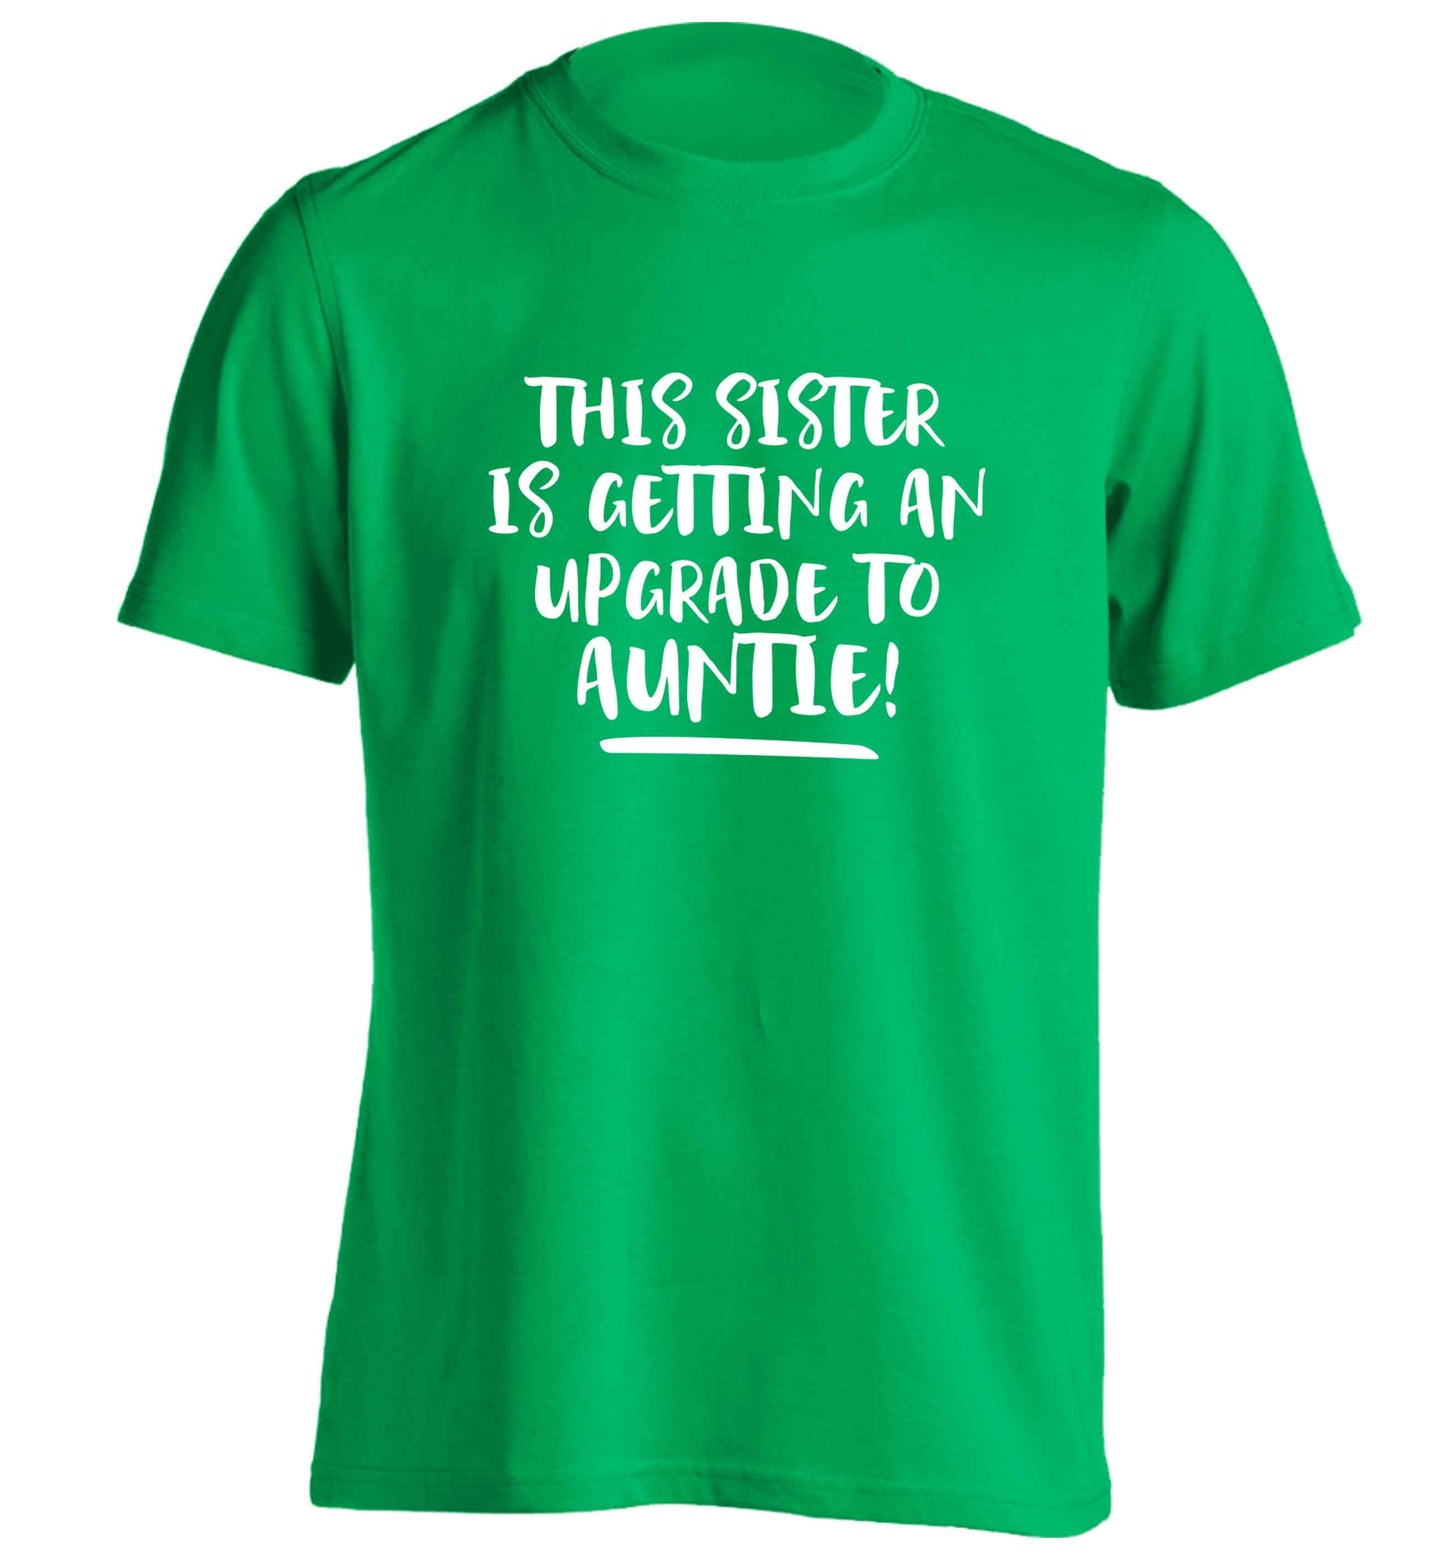 This sister is getting an upgrade to auntie! adults unisex green Tshirt 2XL